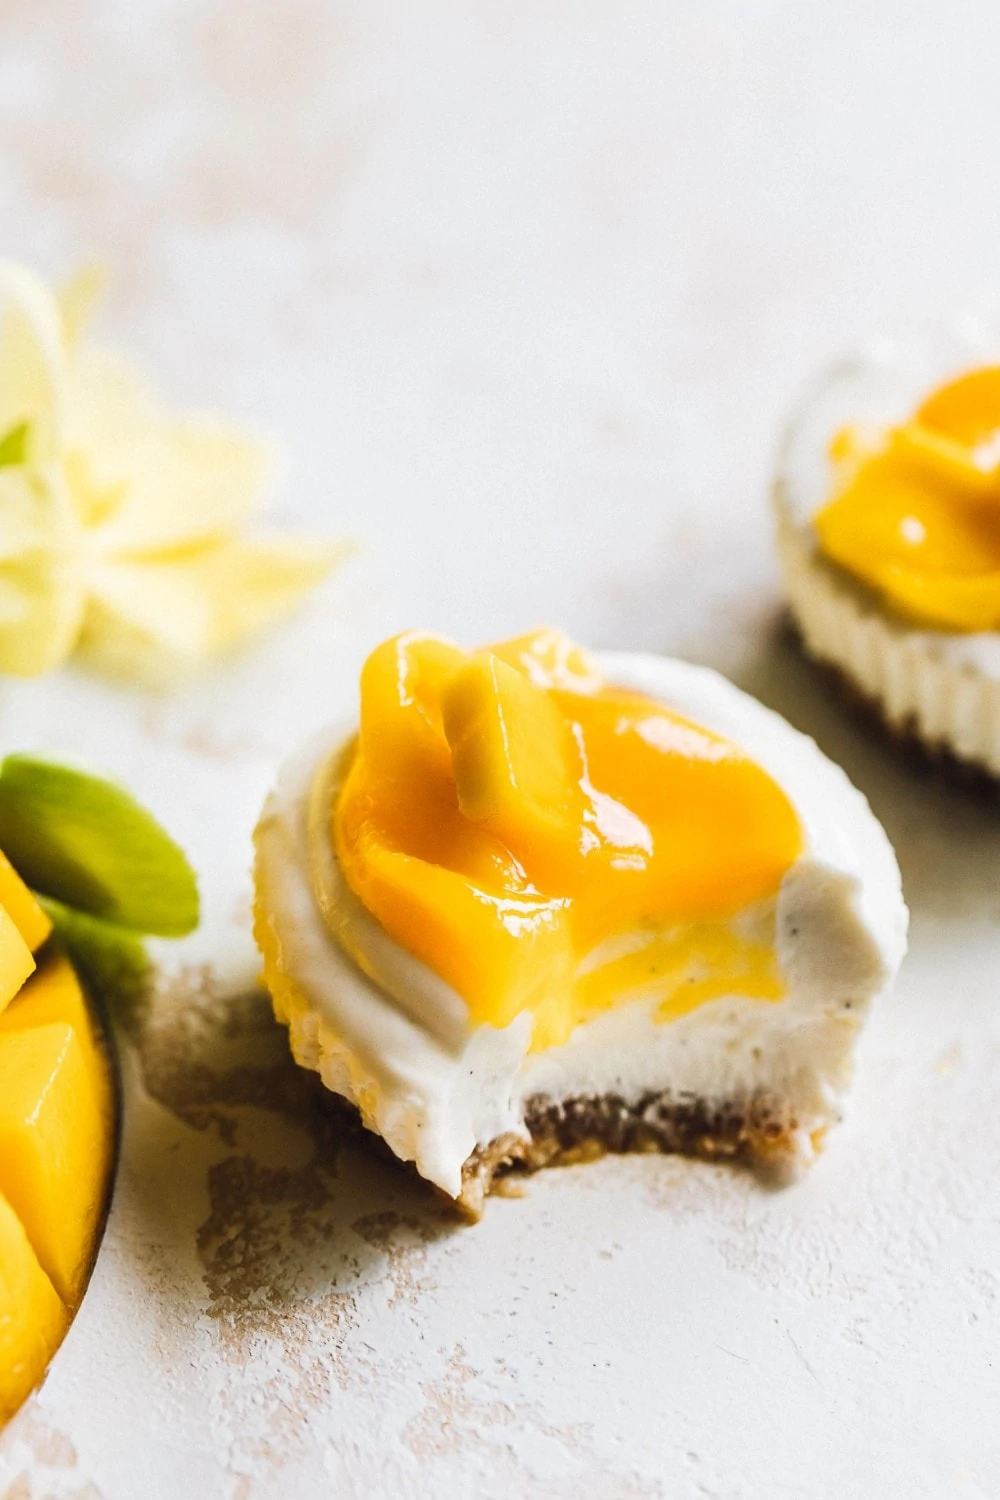 mango cheesecake mini, with a bite taken out of it